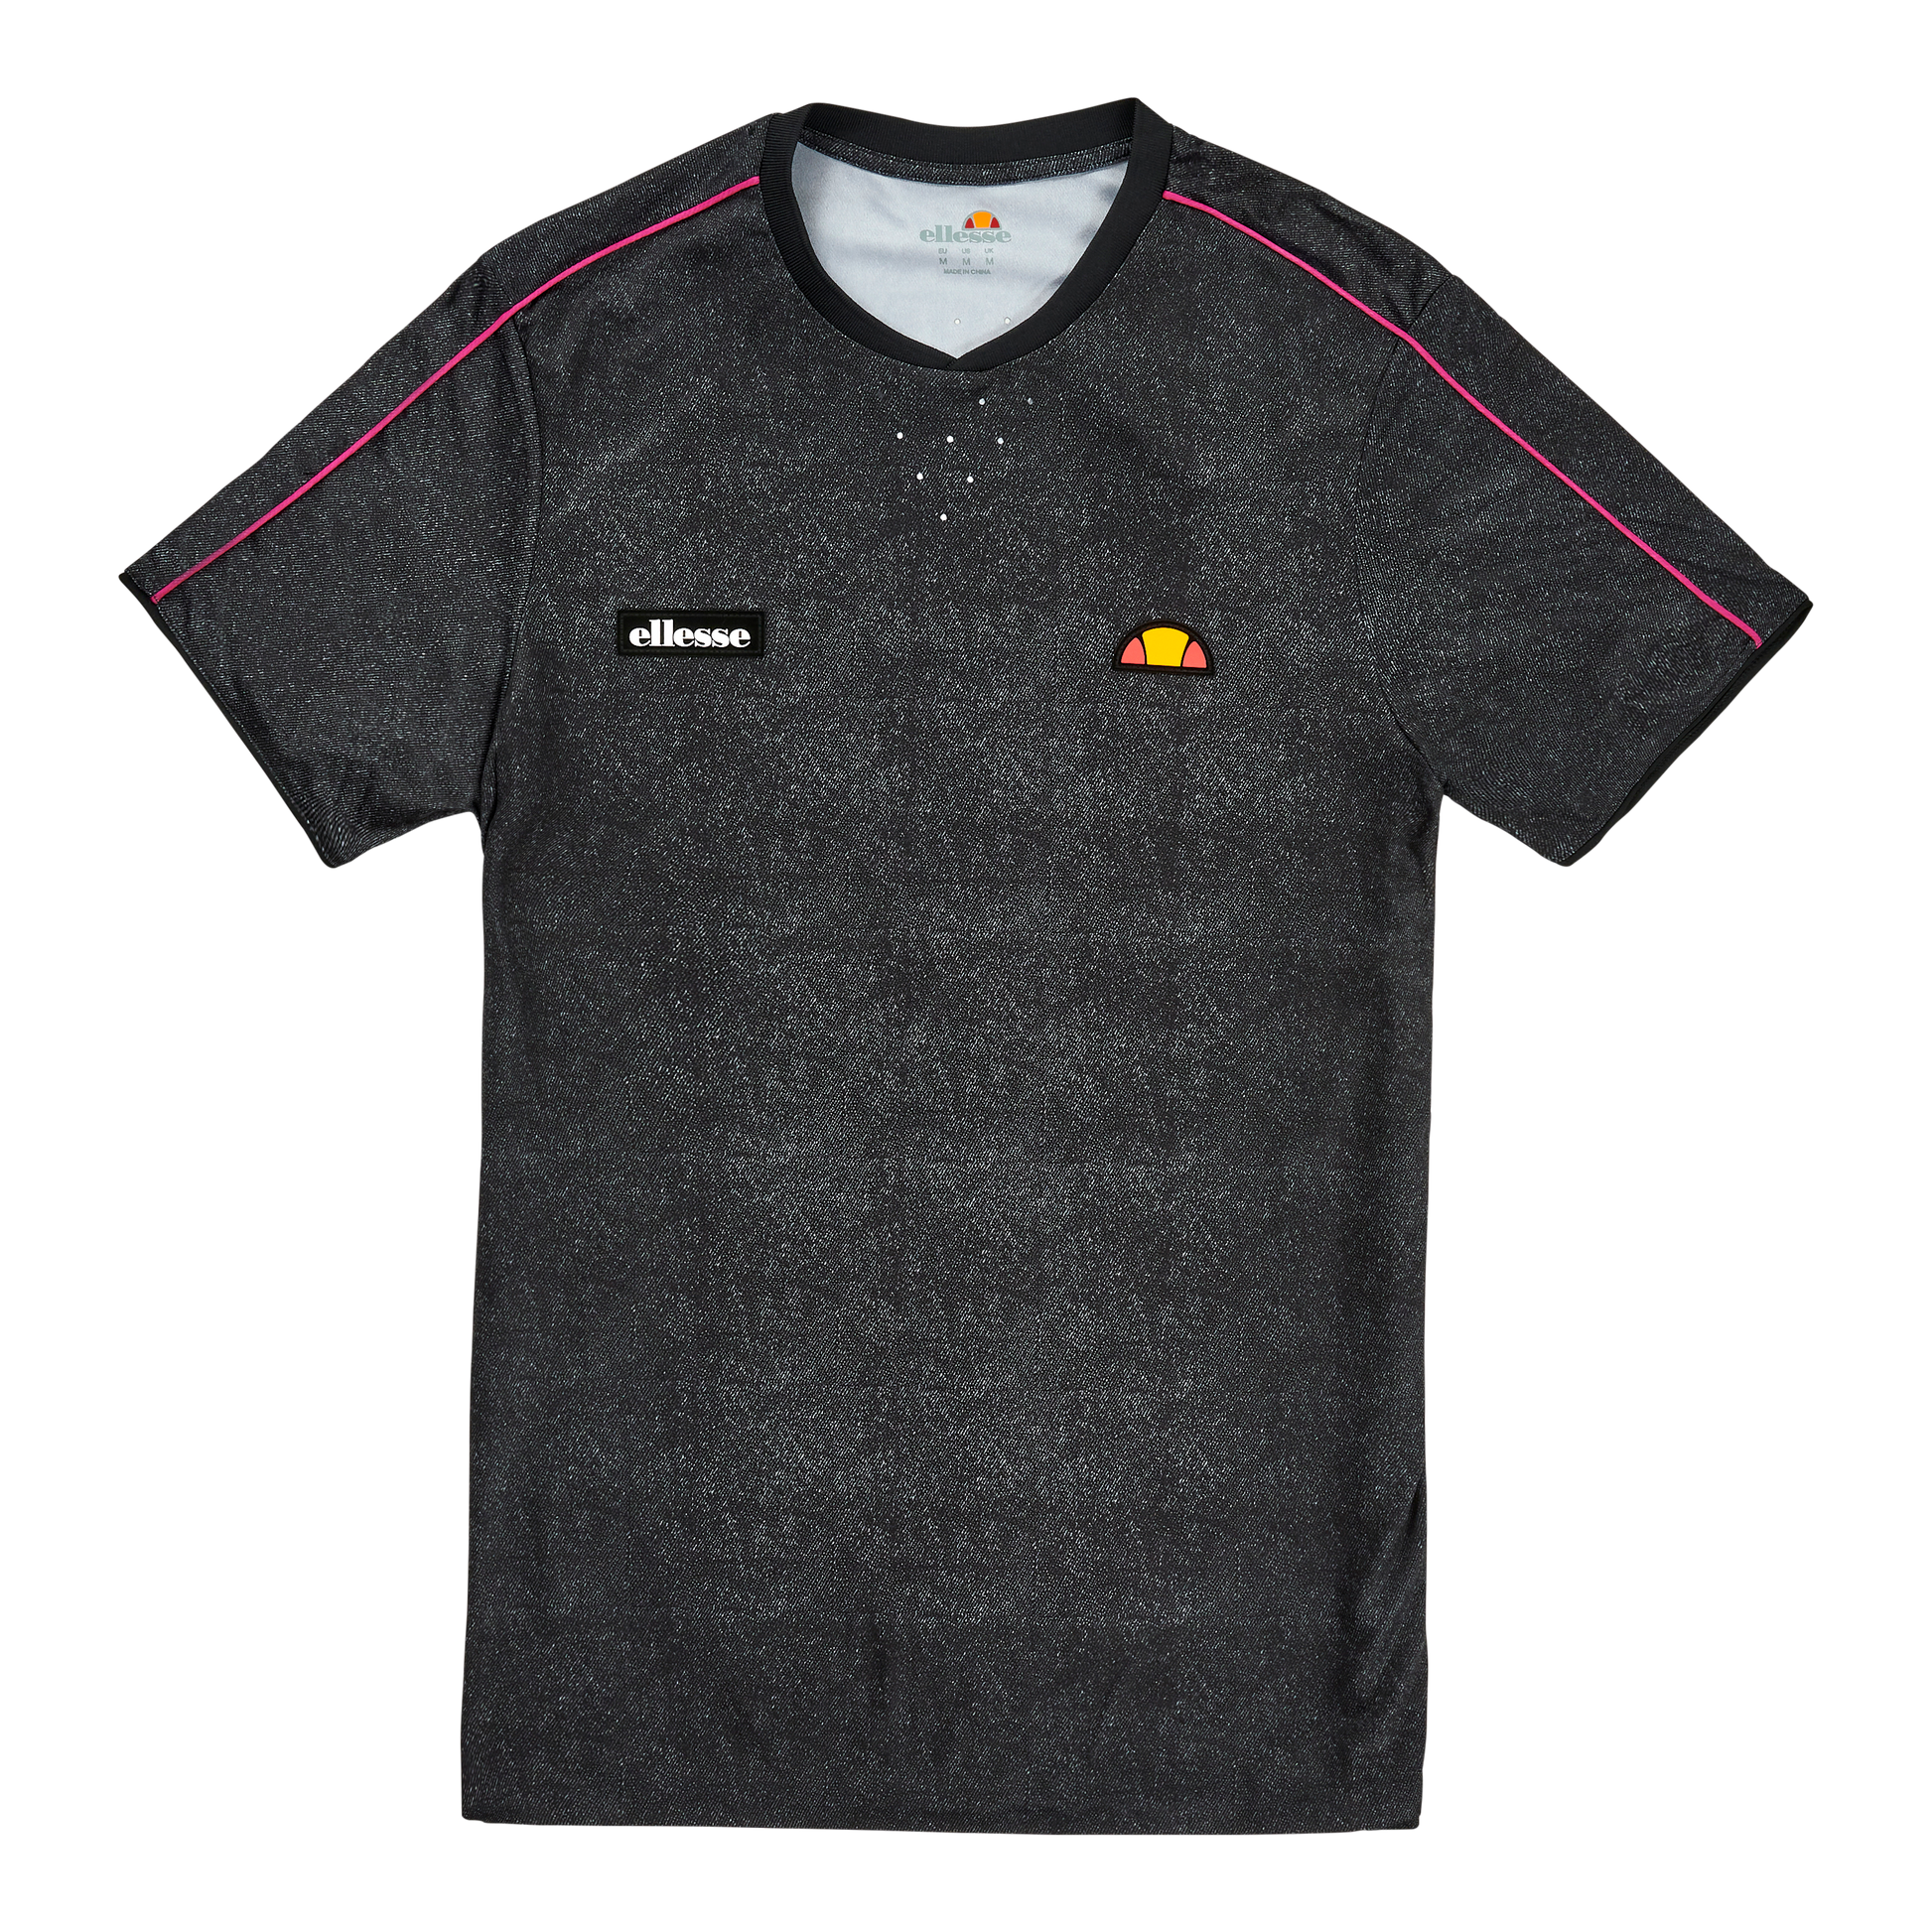 NewCo Brands - Shop the ellesse core collection.